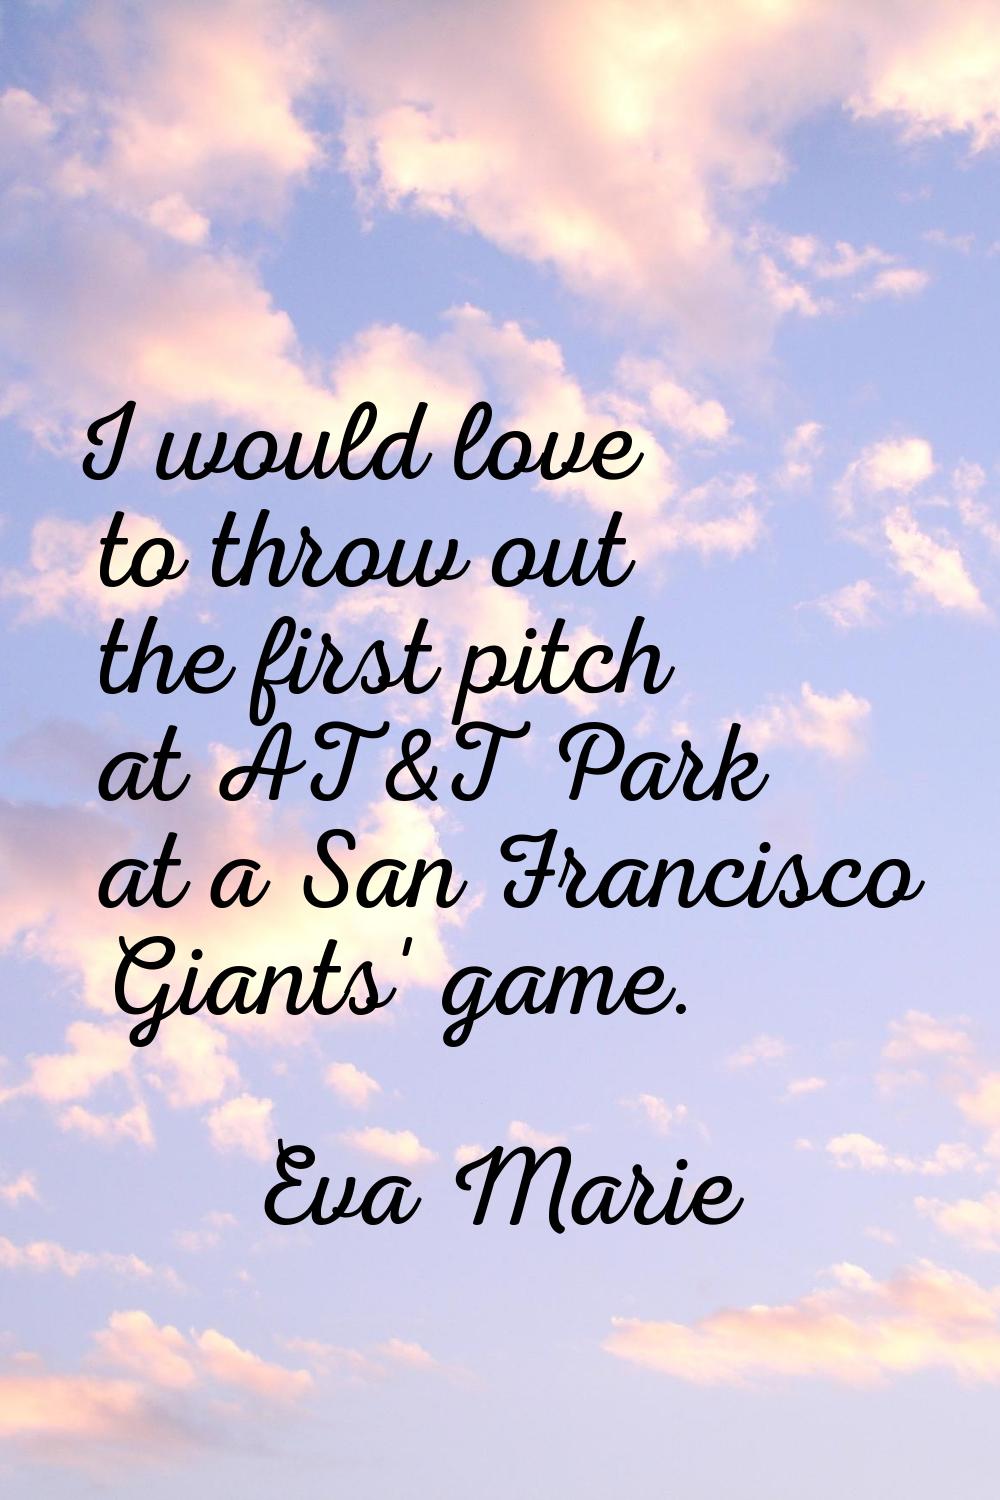 I would love to throw out the first pitch at AT&T Park at a San Francisco Giants' game.